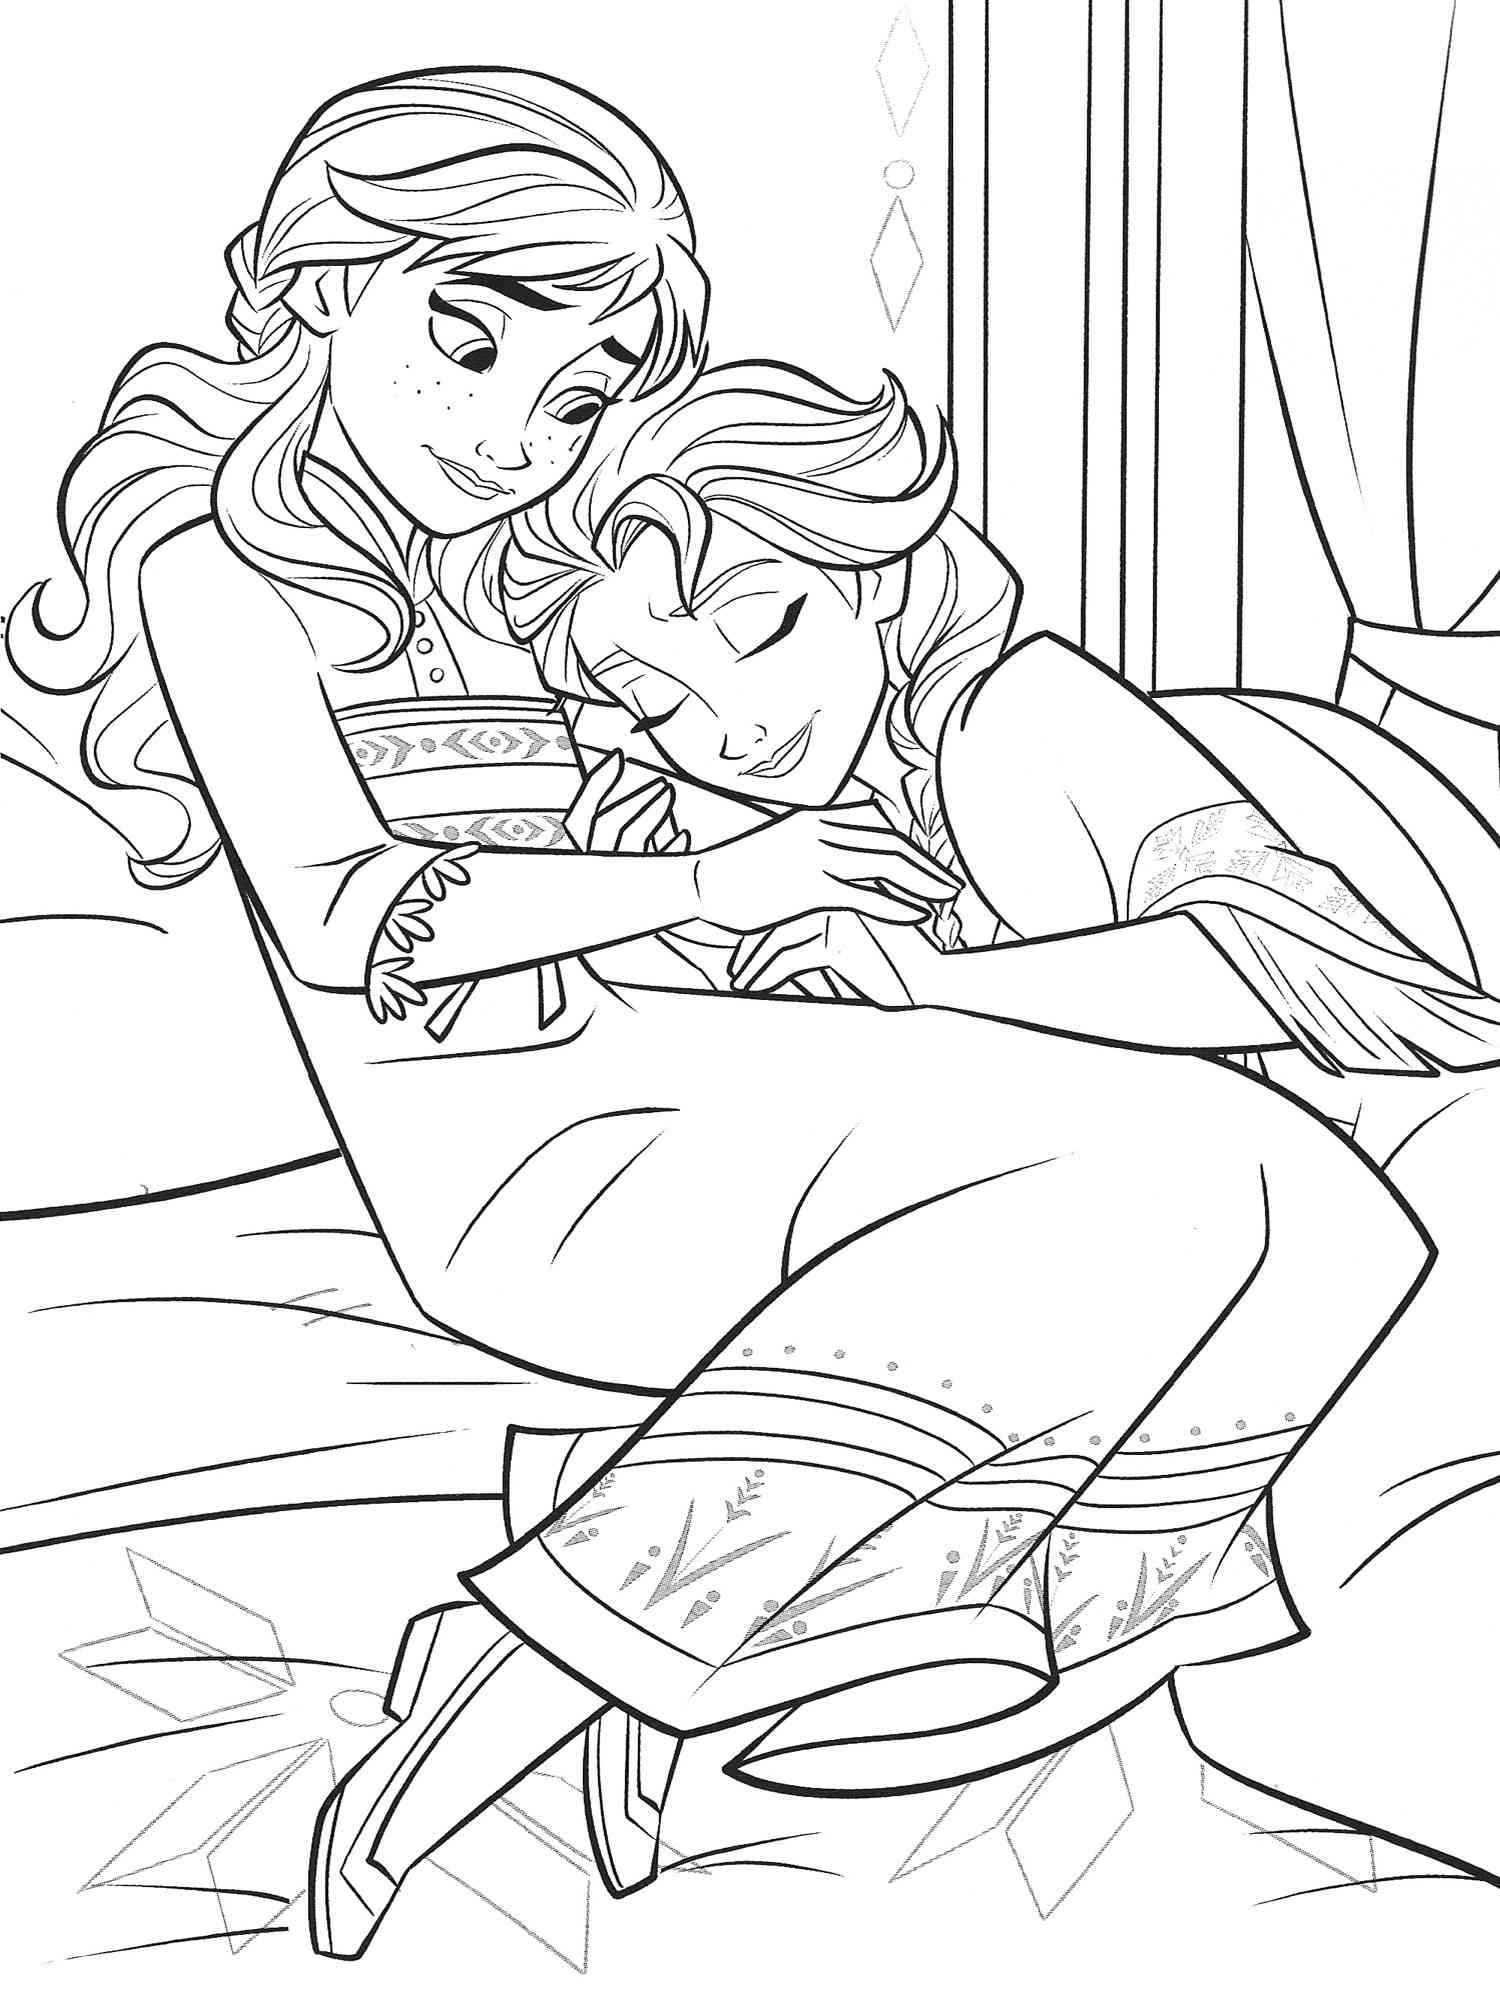 Elsa and Anna 1 coloring page